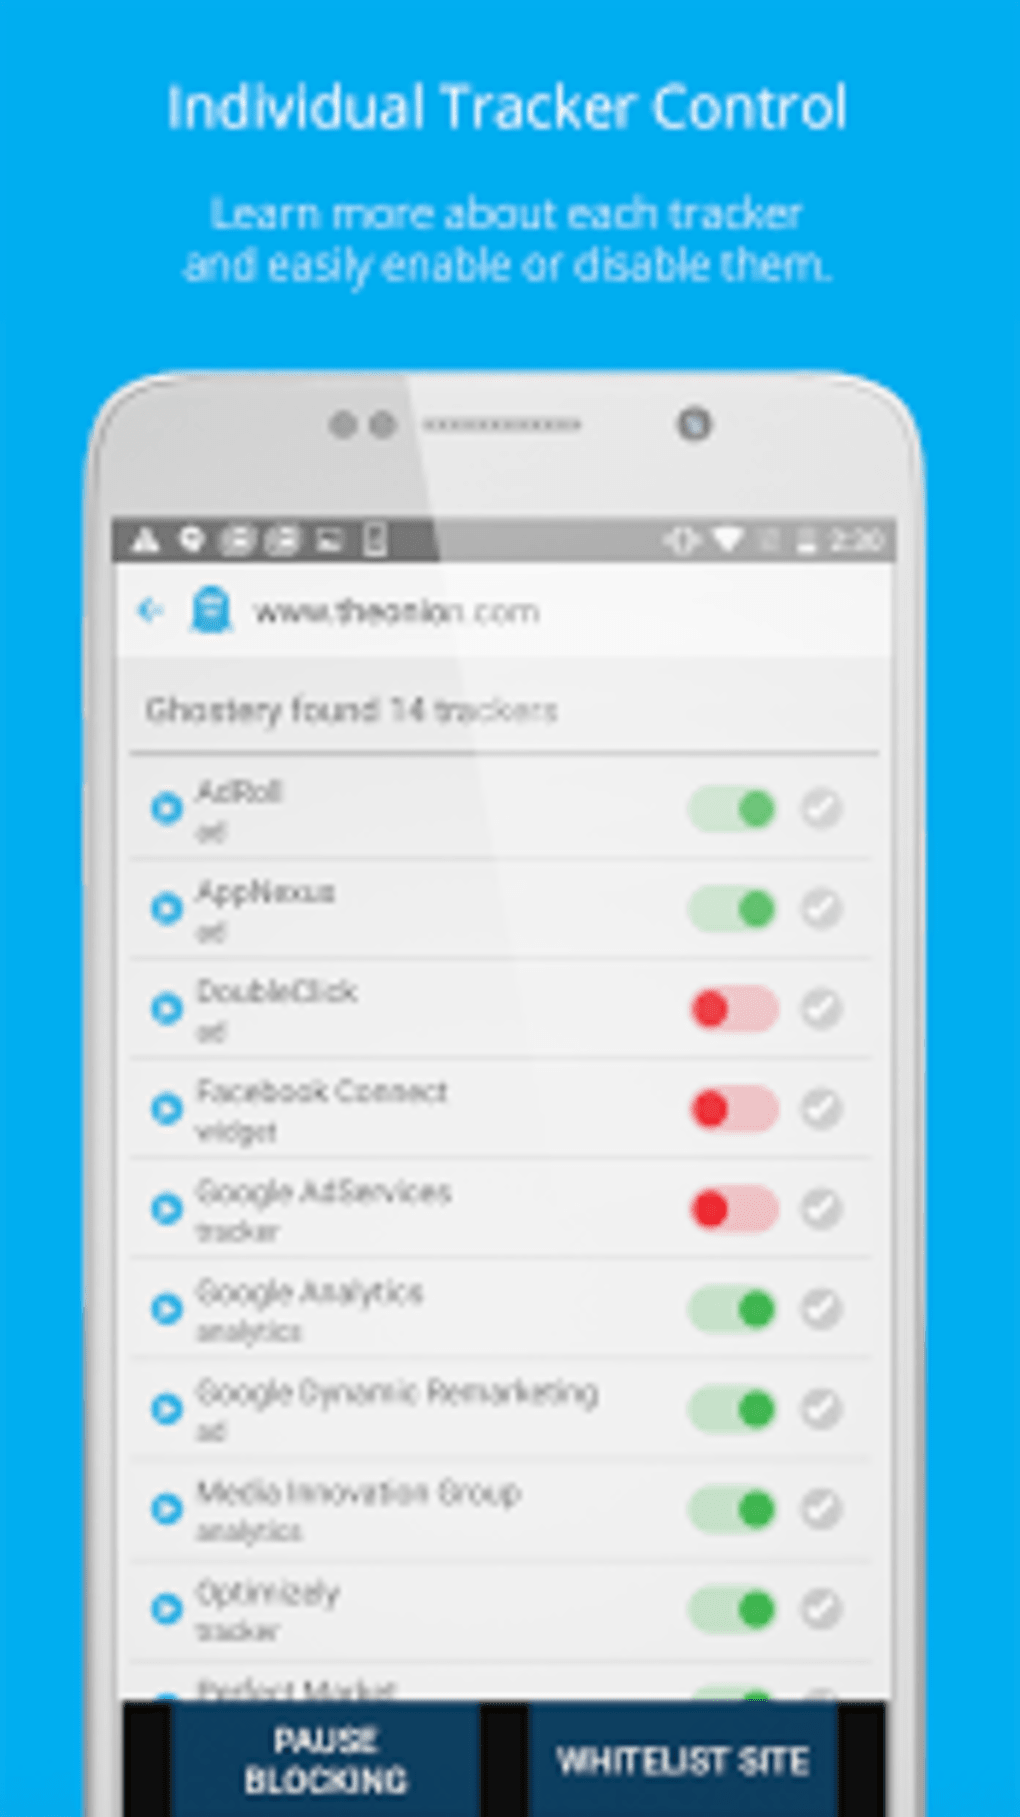 Ghostery privacy browser. Tracker Control. Ghostery сфтекат. Ghostery Trekker Block. Track control